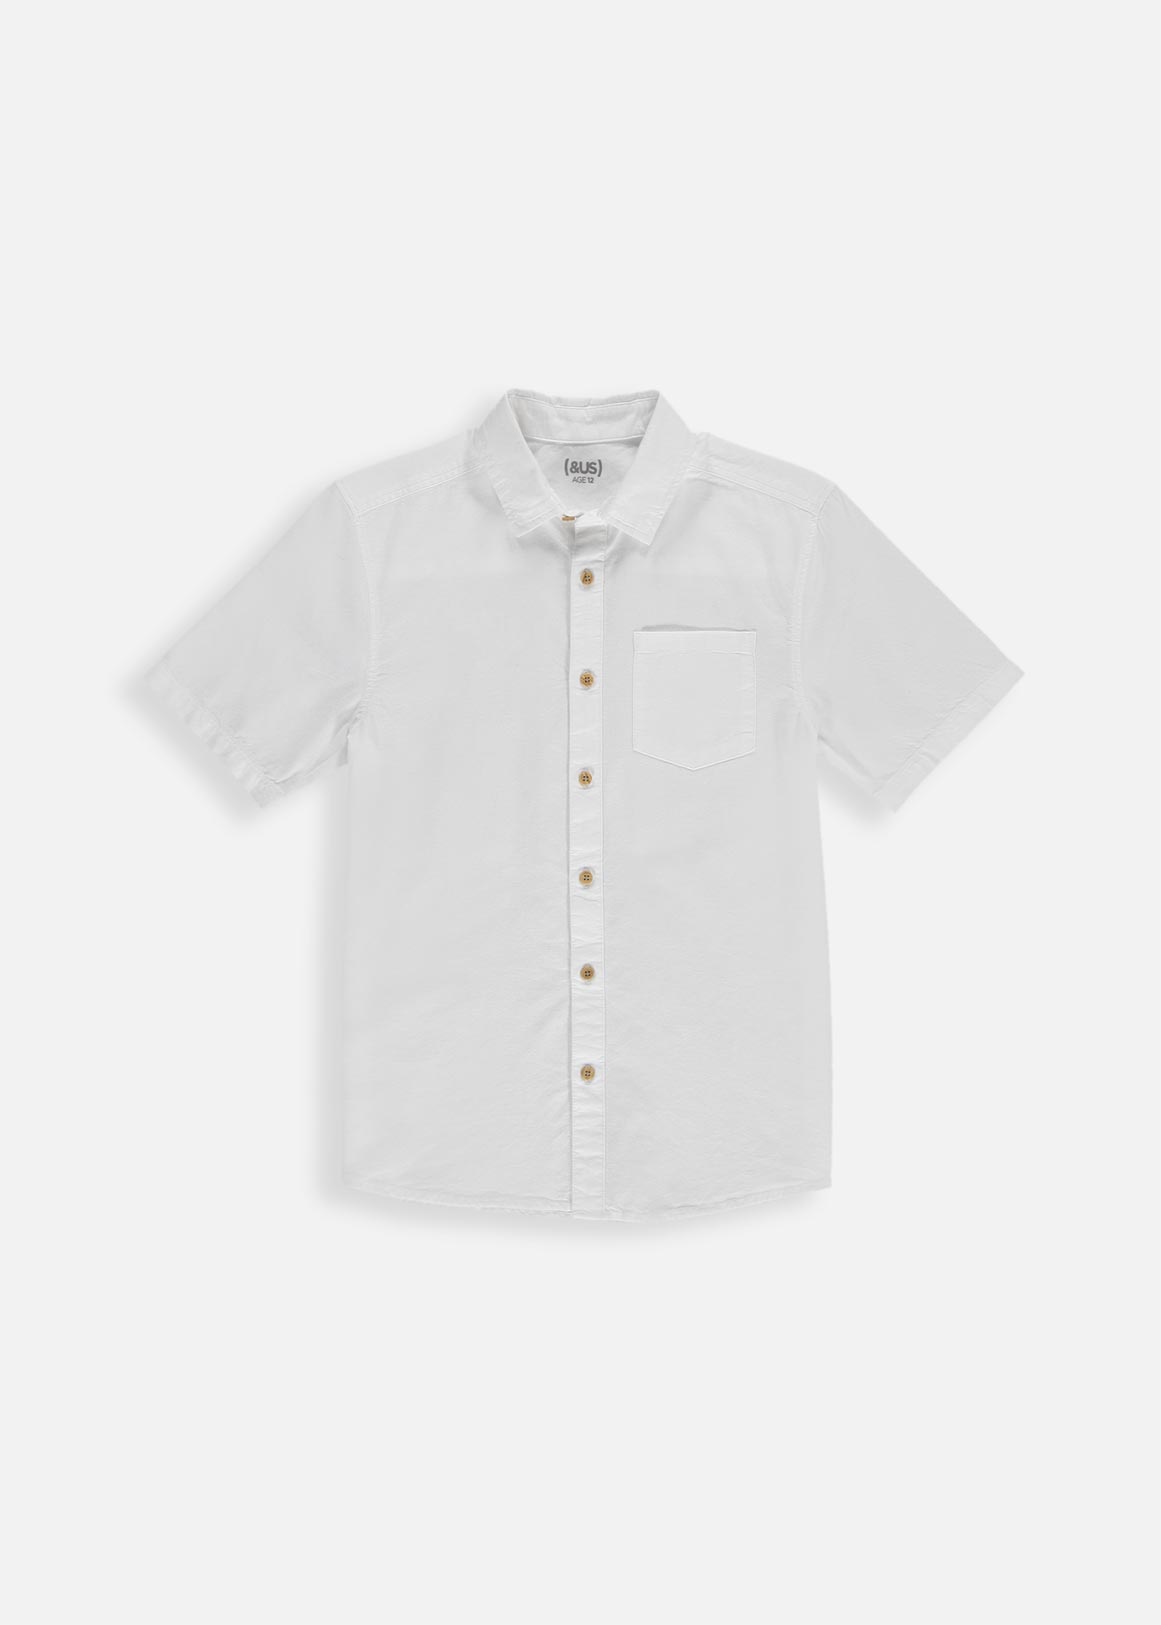 SS PLAIN TEXTURED SH - Woolworths Mauritius Online